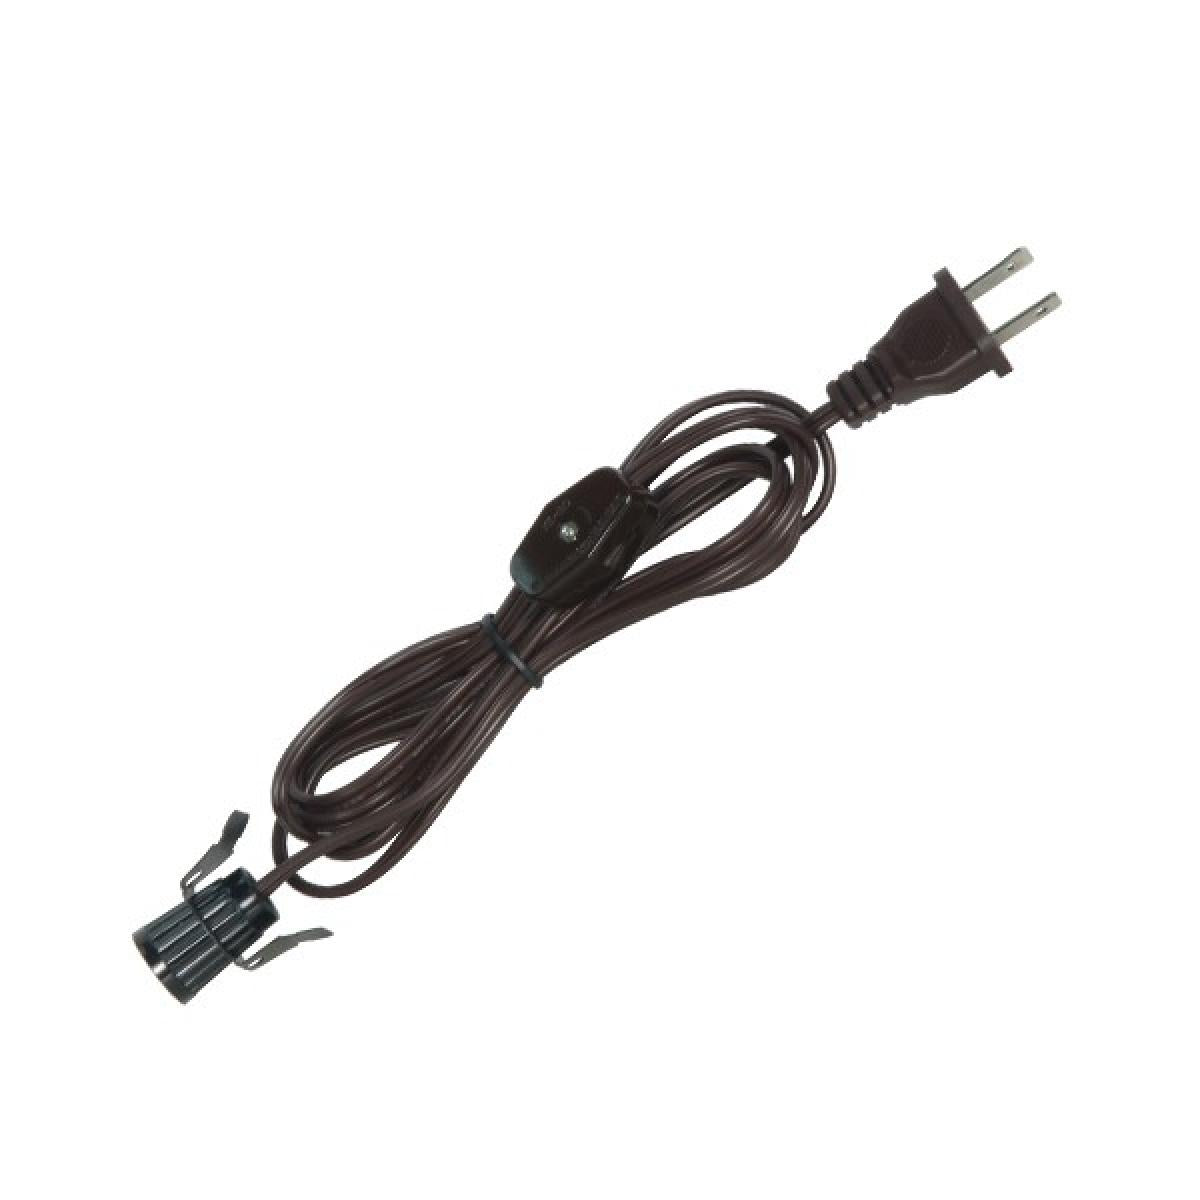 Satco 80-1787 8 Foot #18 SPT-2 Brown Cord, Switch, And Plug (Switch 17" From Socket)